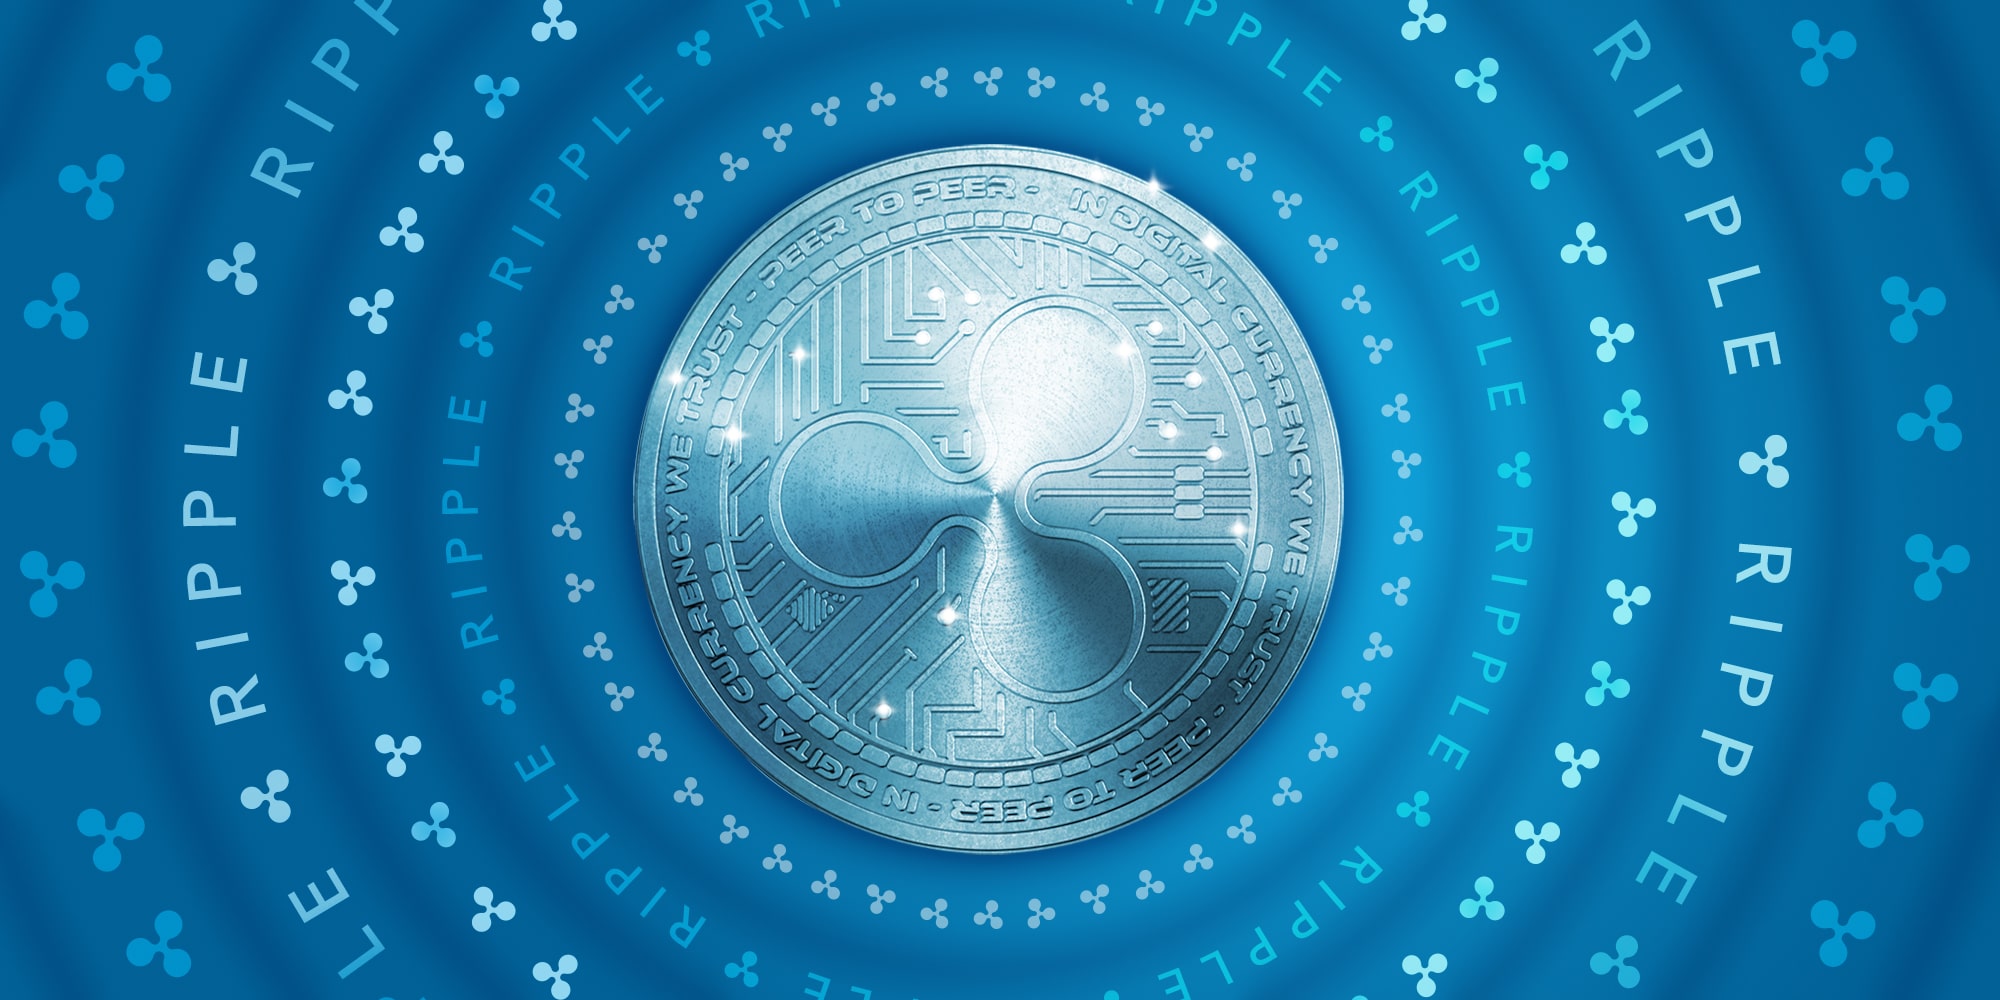 Ripple Going Head-to-Head With Bitcoin: Next Crypto Craze is Coming